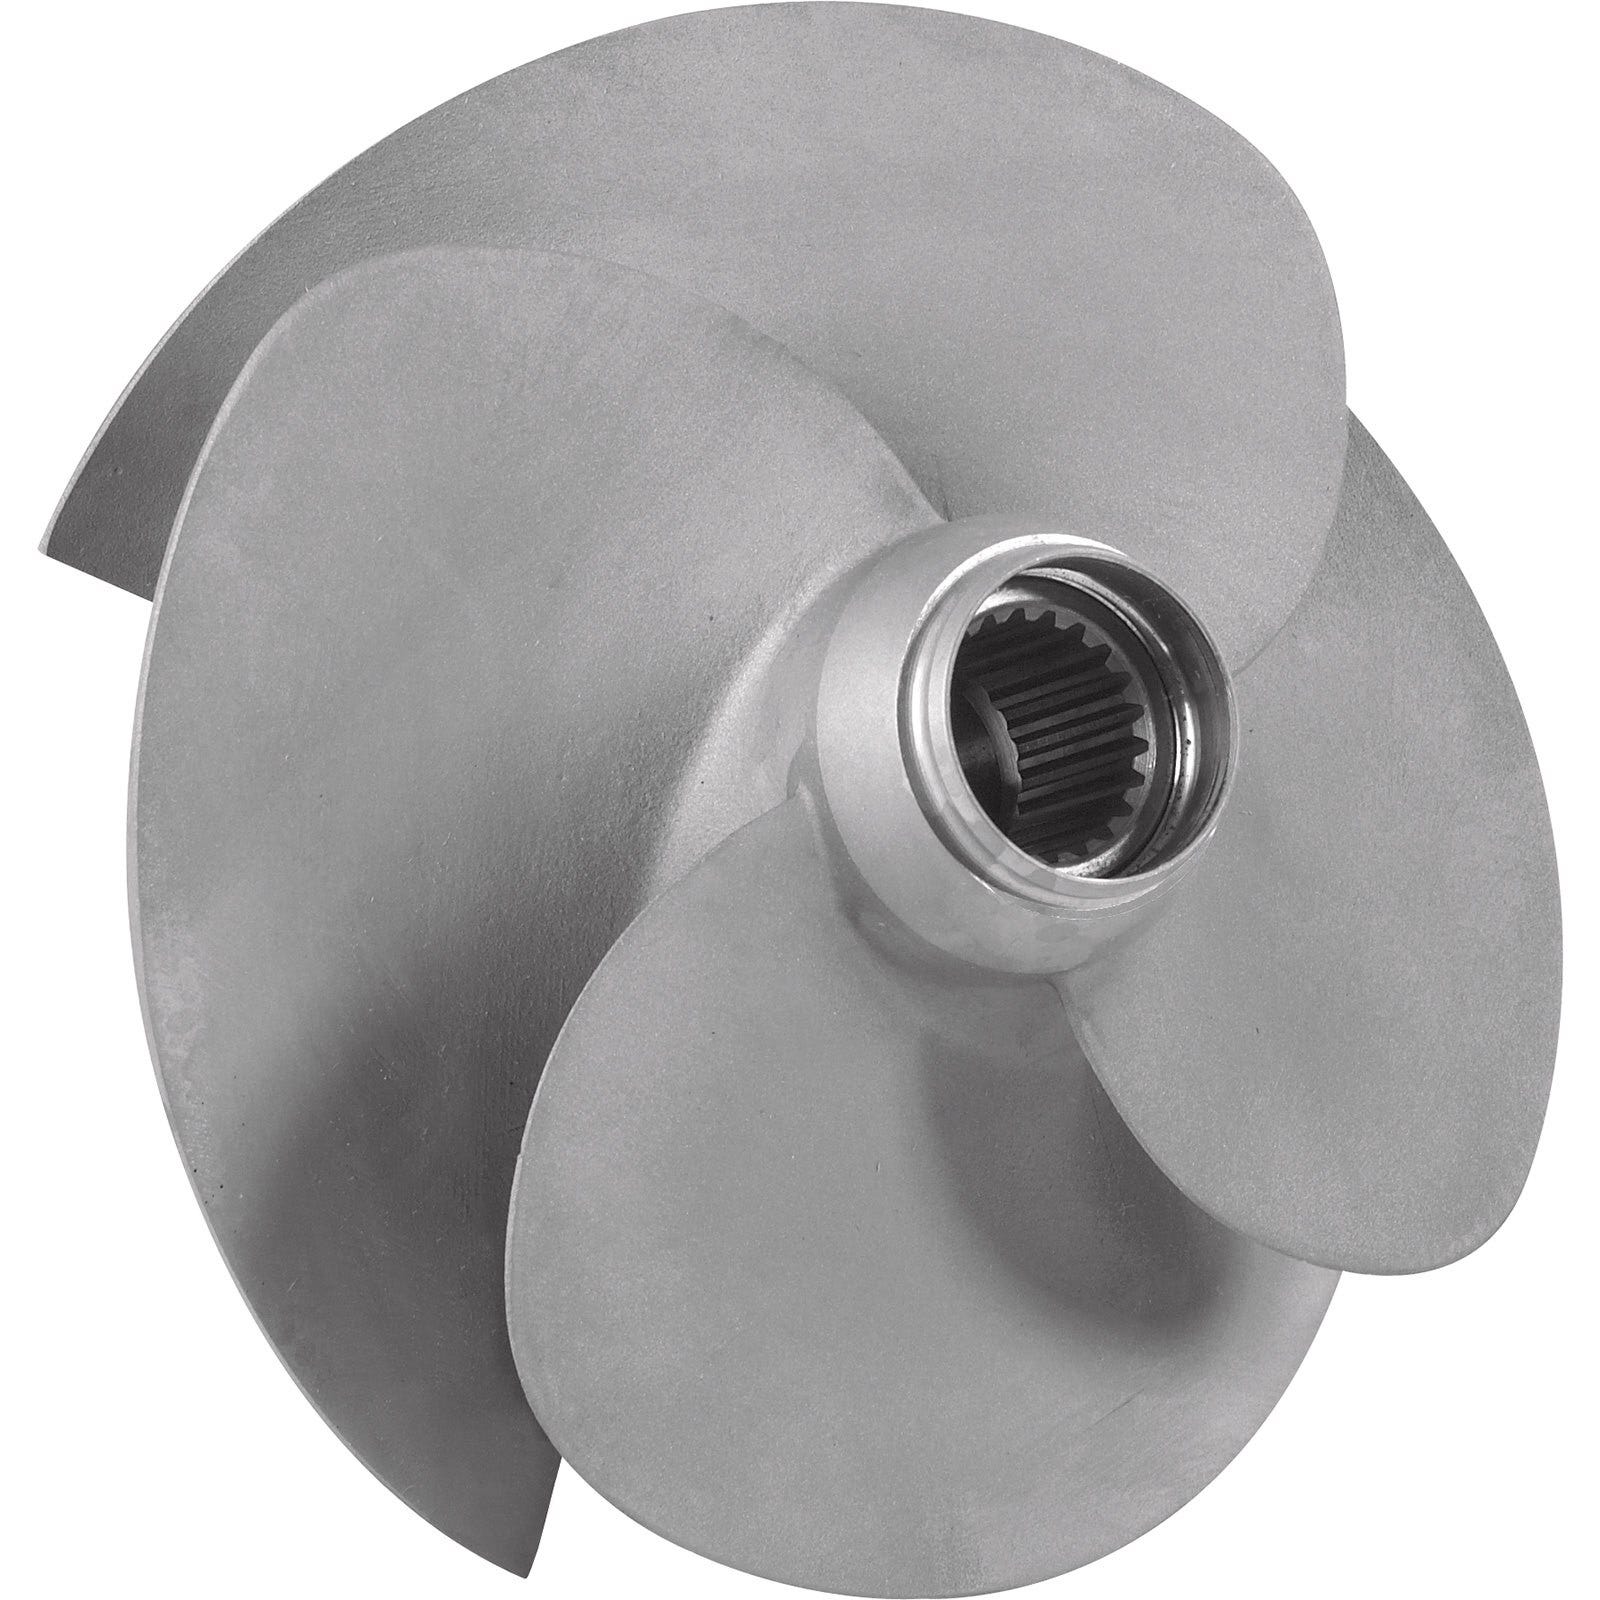 RXT-X (2010), RXT iS 255/260 (2009-2010) Impeller - 267000974 - The Parts Lodge